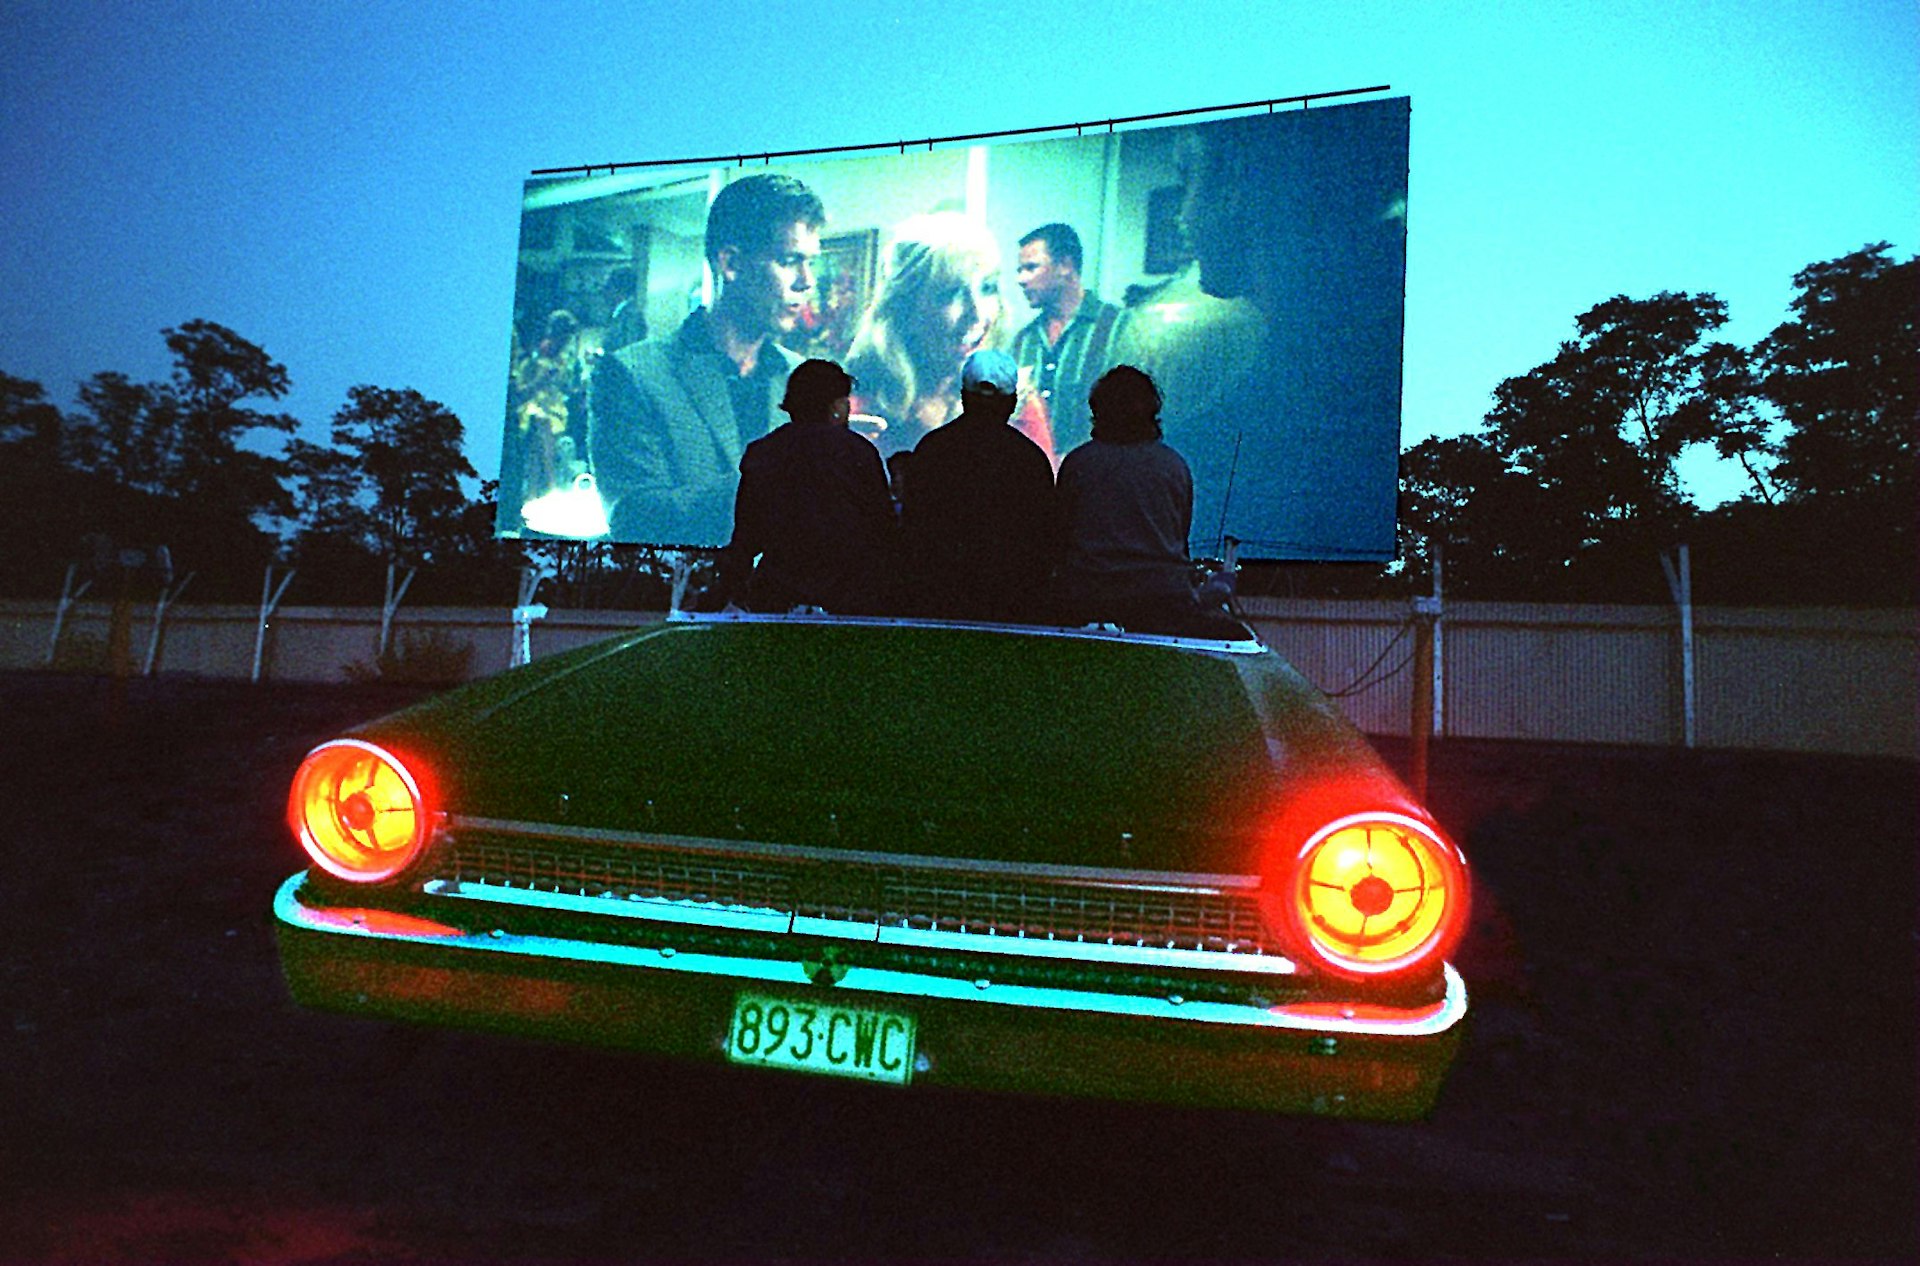 A trop of people sit on the edge of a top-down car watching a movie at the Wellfleet Drive-In in Cape Cod, Massachusetts.